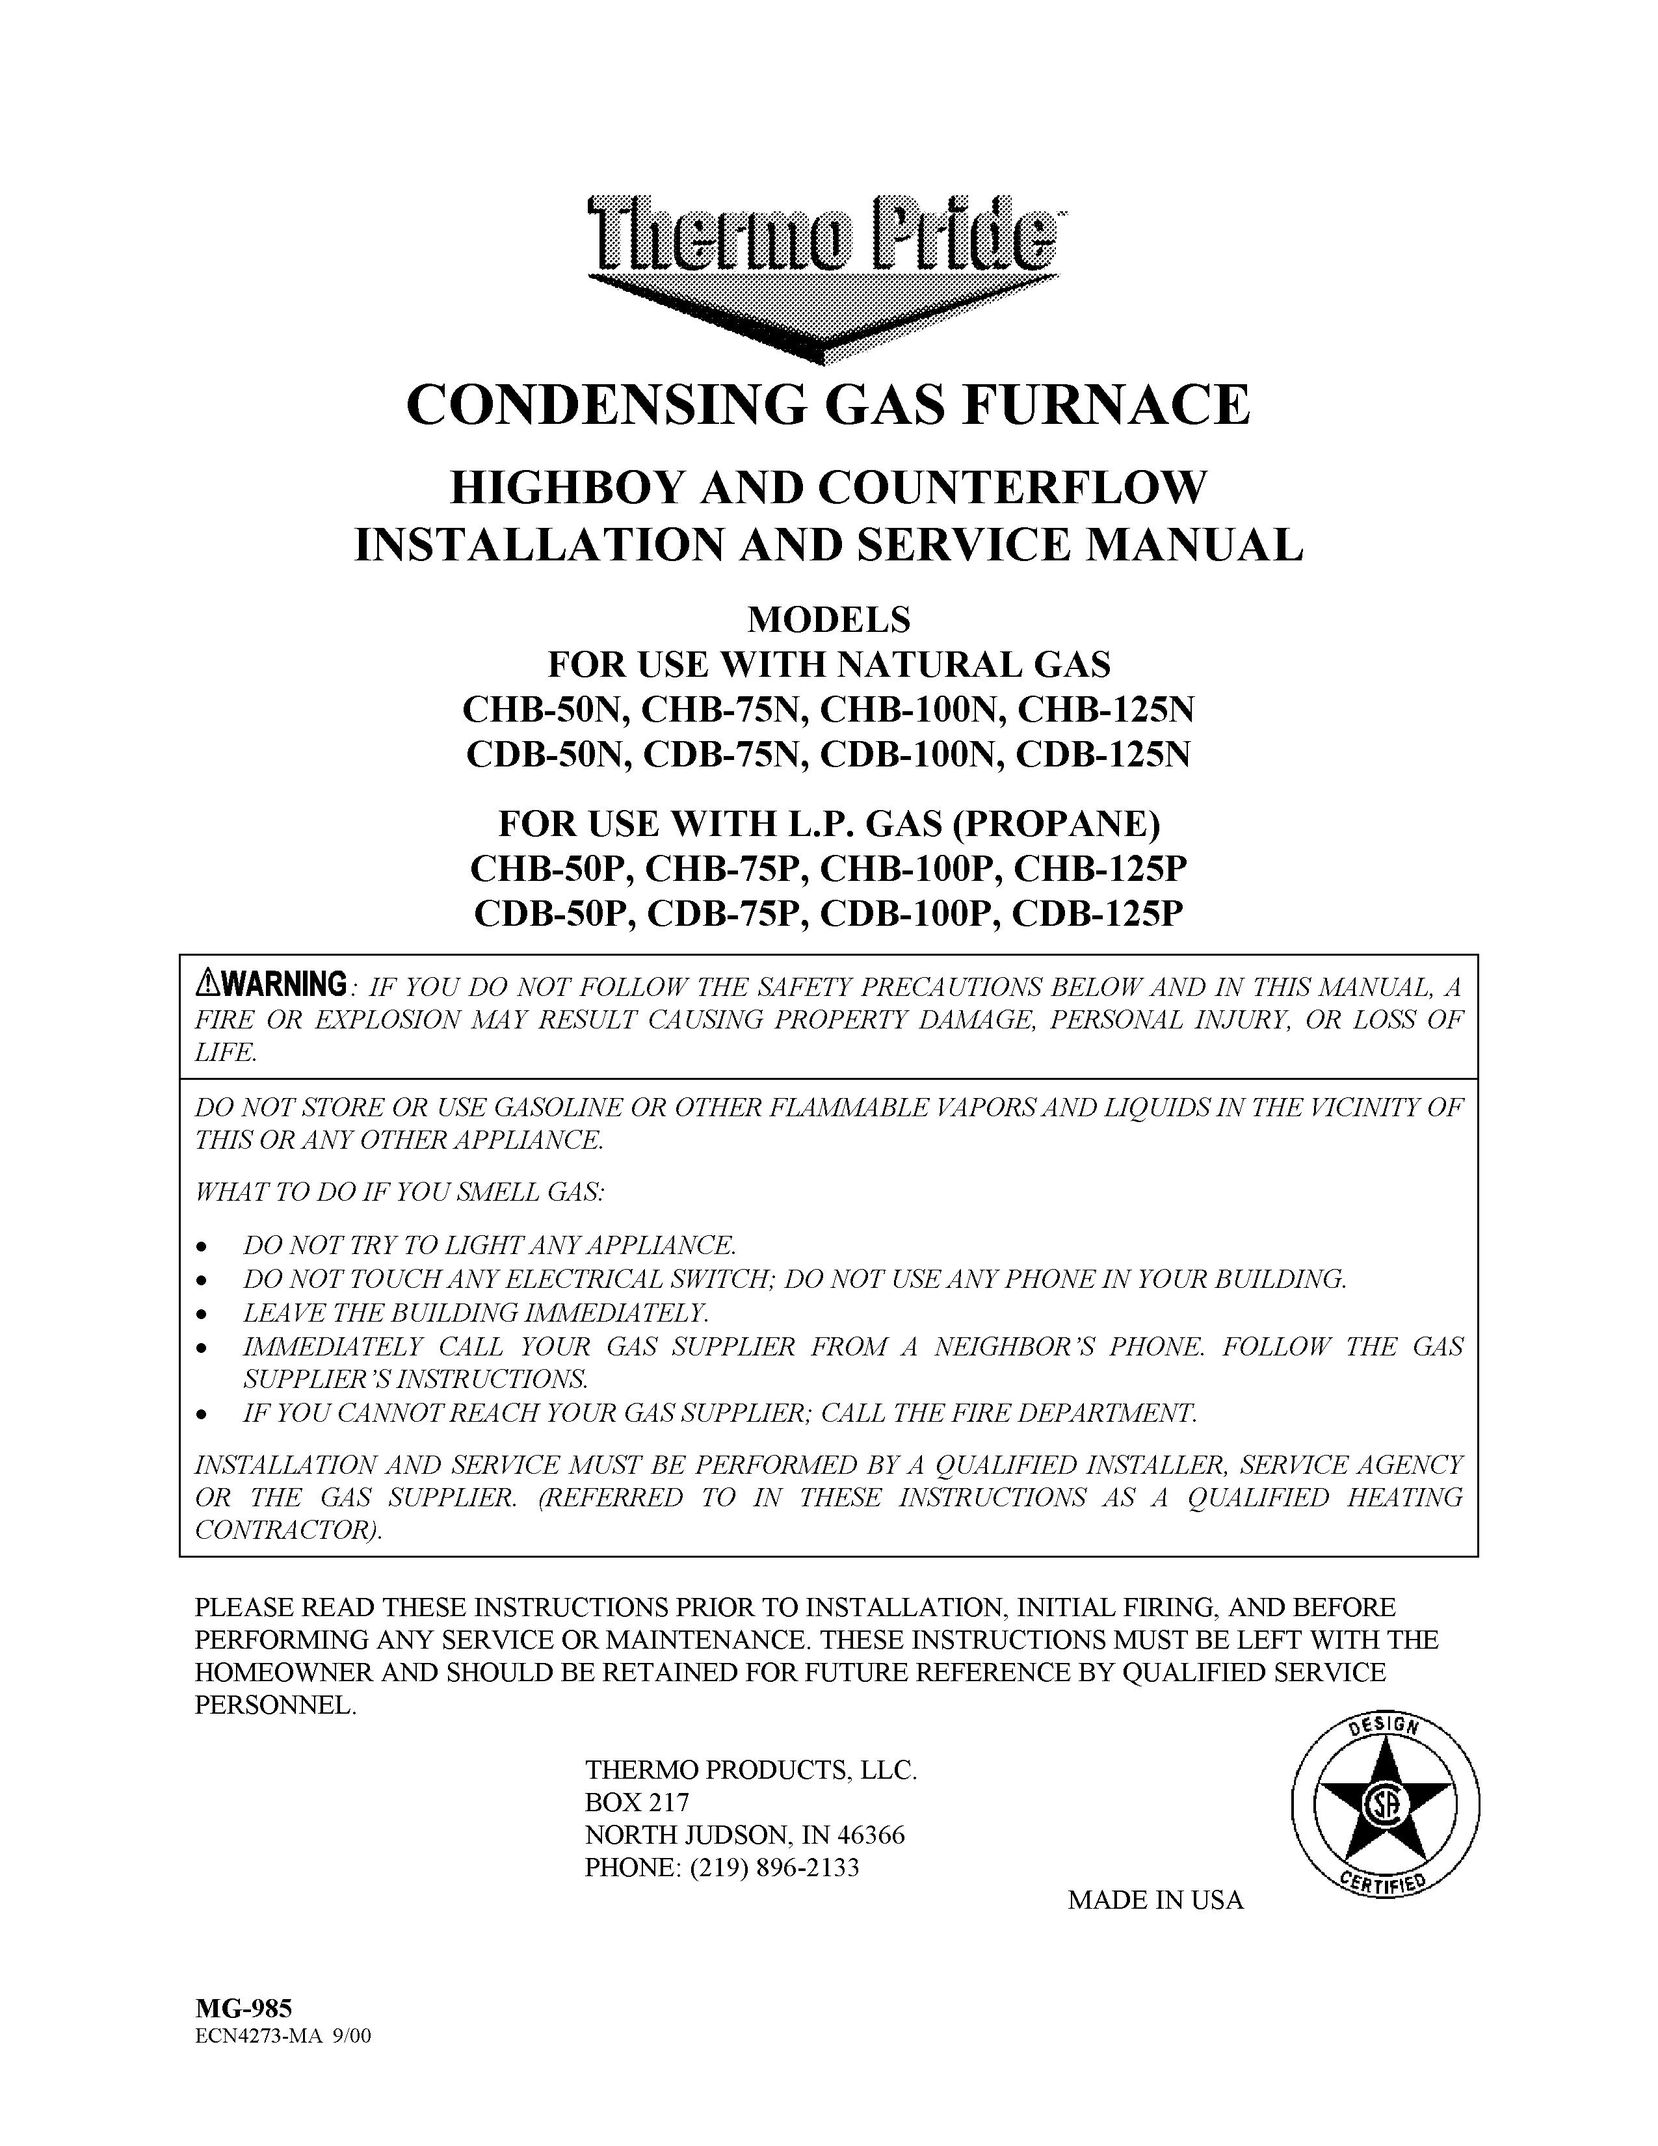 Thermo Products CDB-125N Furnace User Manual